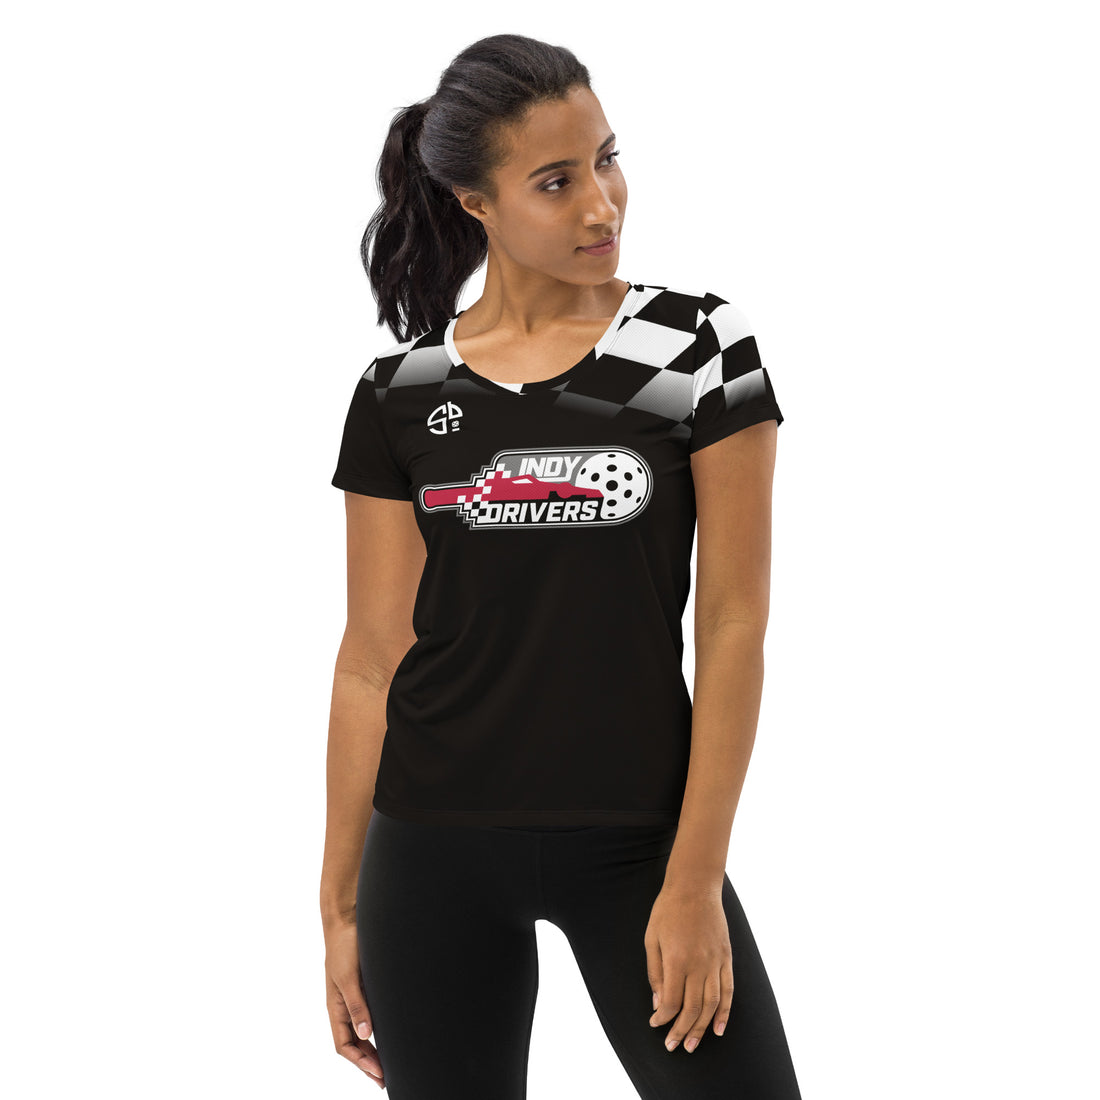 CHRIS MILLS 13, INDY DRIVERS™ 2023 AUTHENTIC SHORT SLEEVE  JERSEY - BLACK